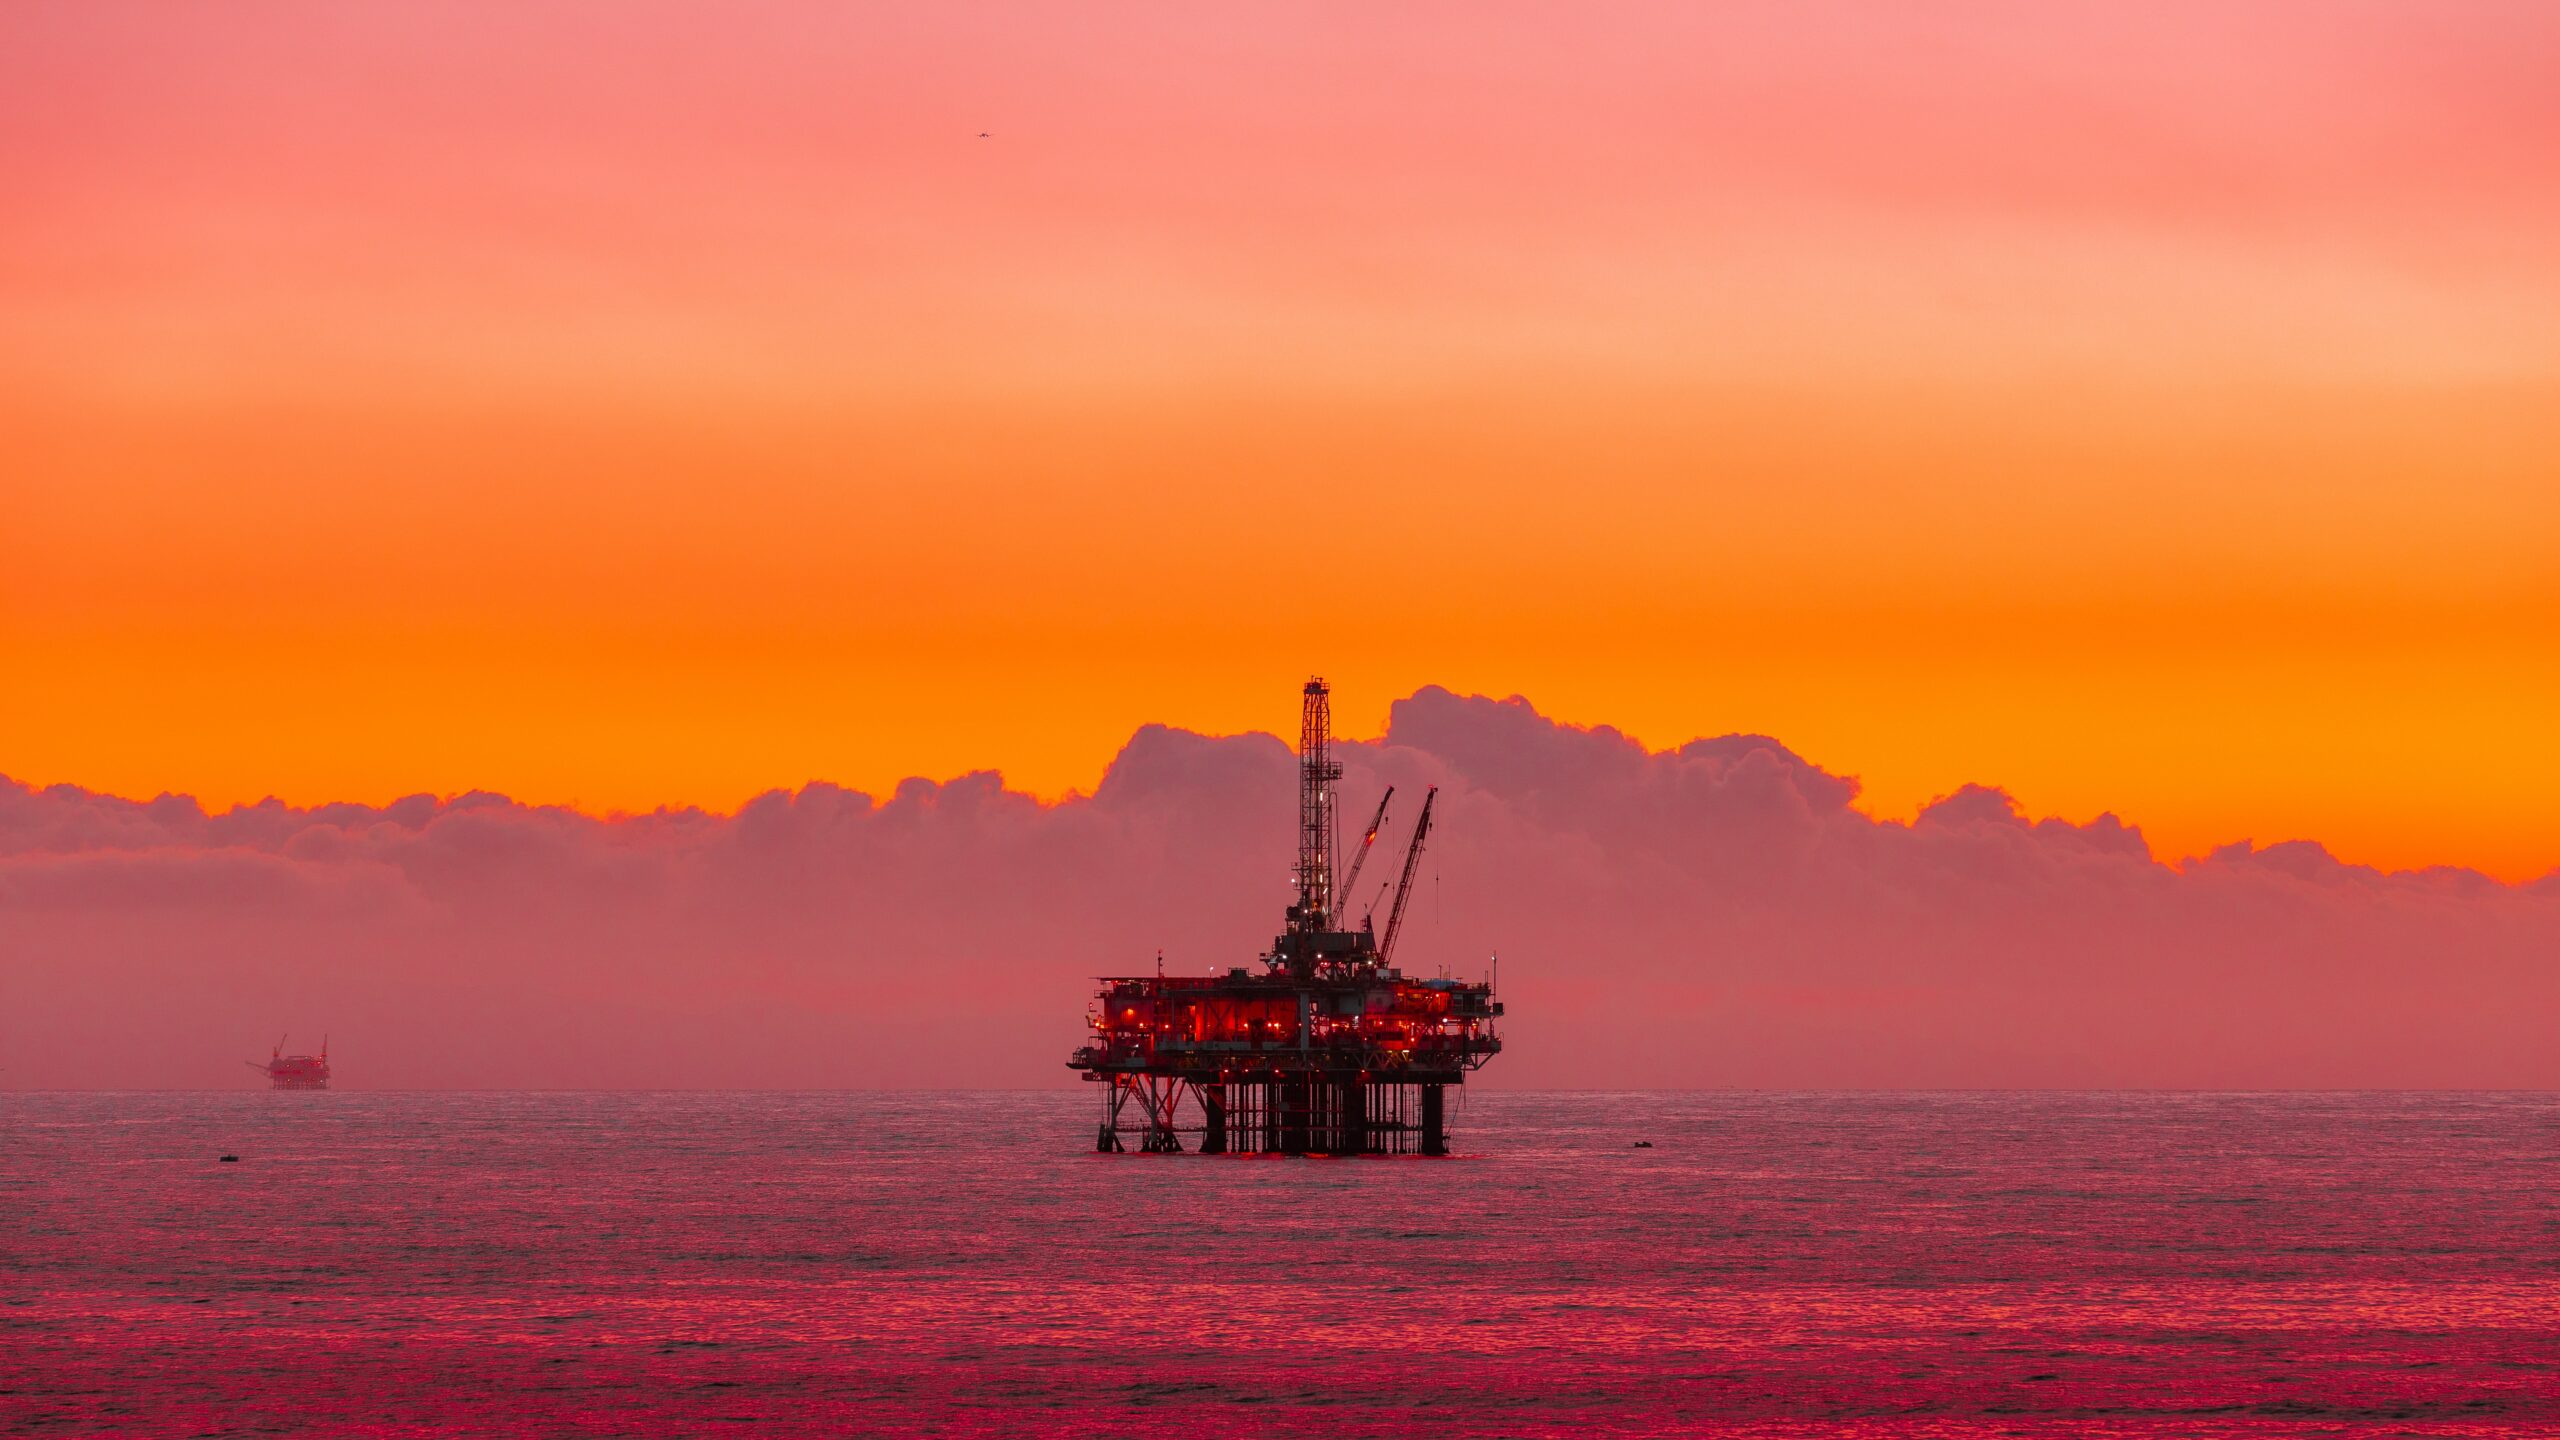 Offshore oil rig